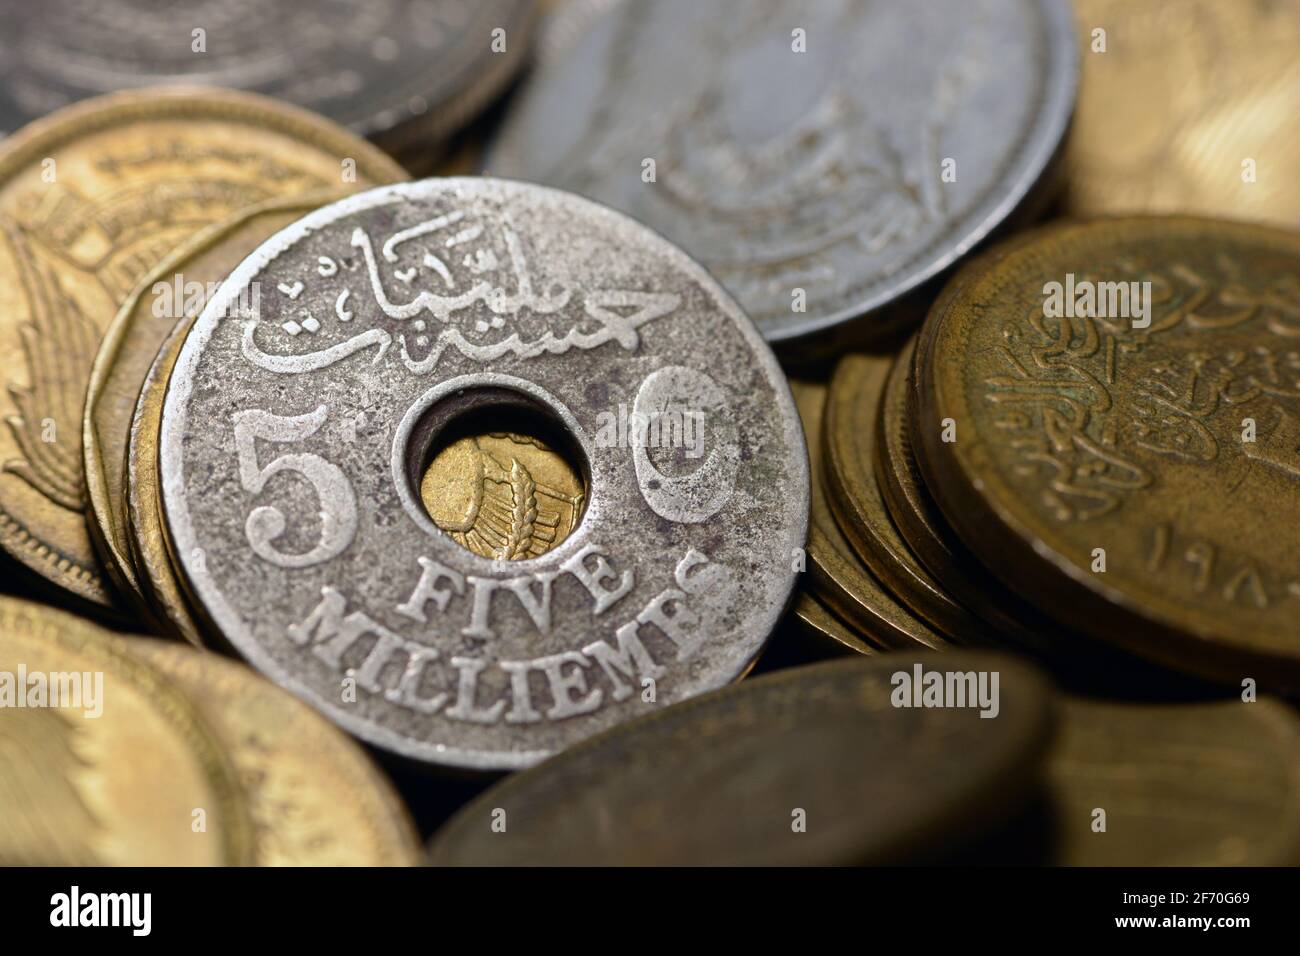 five milliemes coin 1917, old Egyptian money of 5 milliemes coin the currency of kingdom of Egypt at the time of Sultan Hussein Kamel of Egypt. Stock Photo